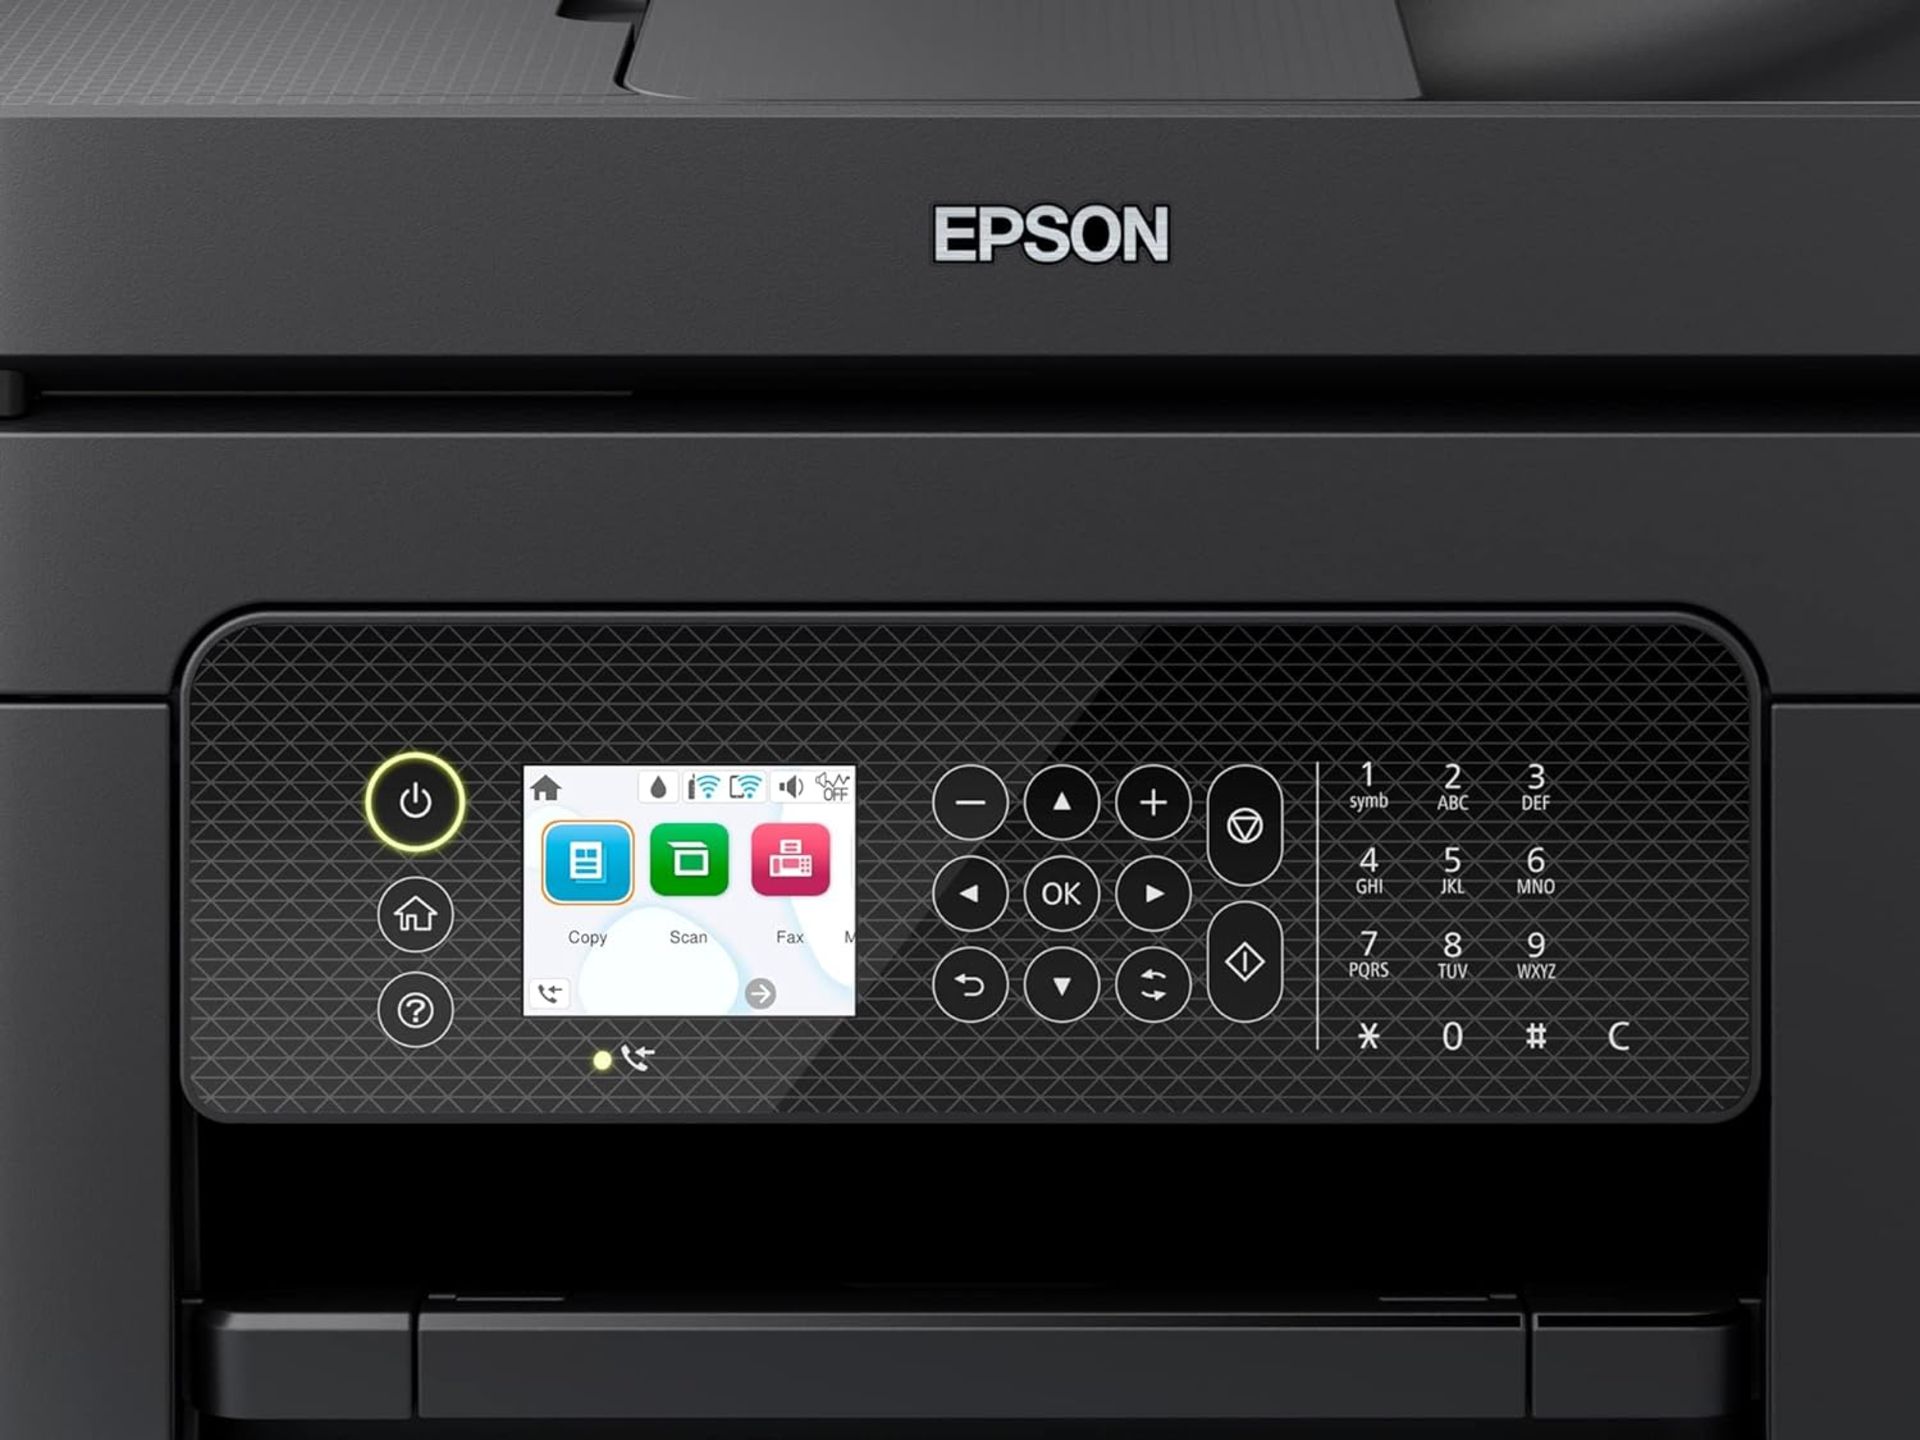 EPSON WF-2950DWF A4 Multifunction Wireless Inkjet Printer. RRP £99.99. (R6R). COMPACT AND - Image 6 of 9